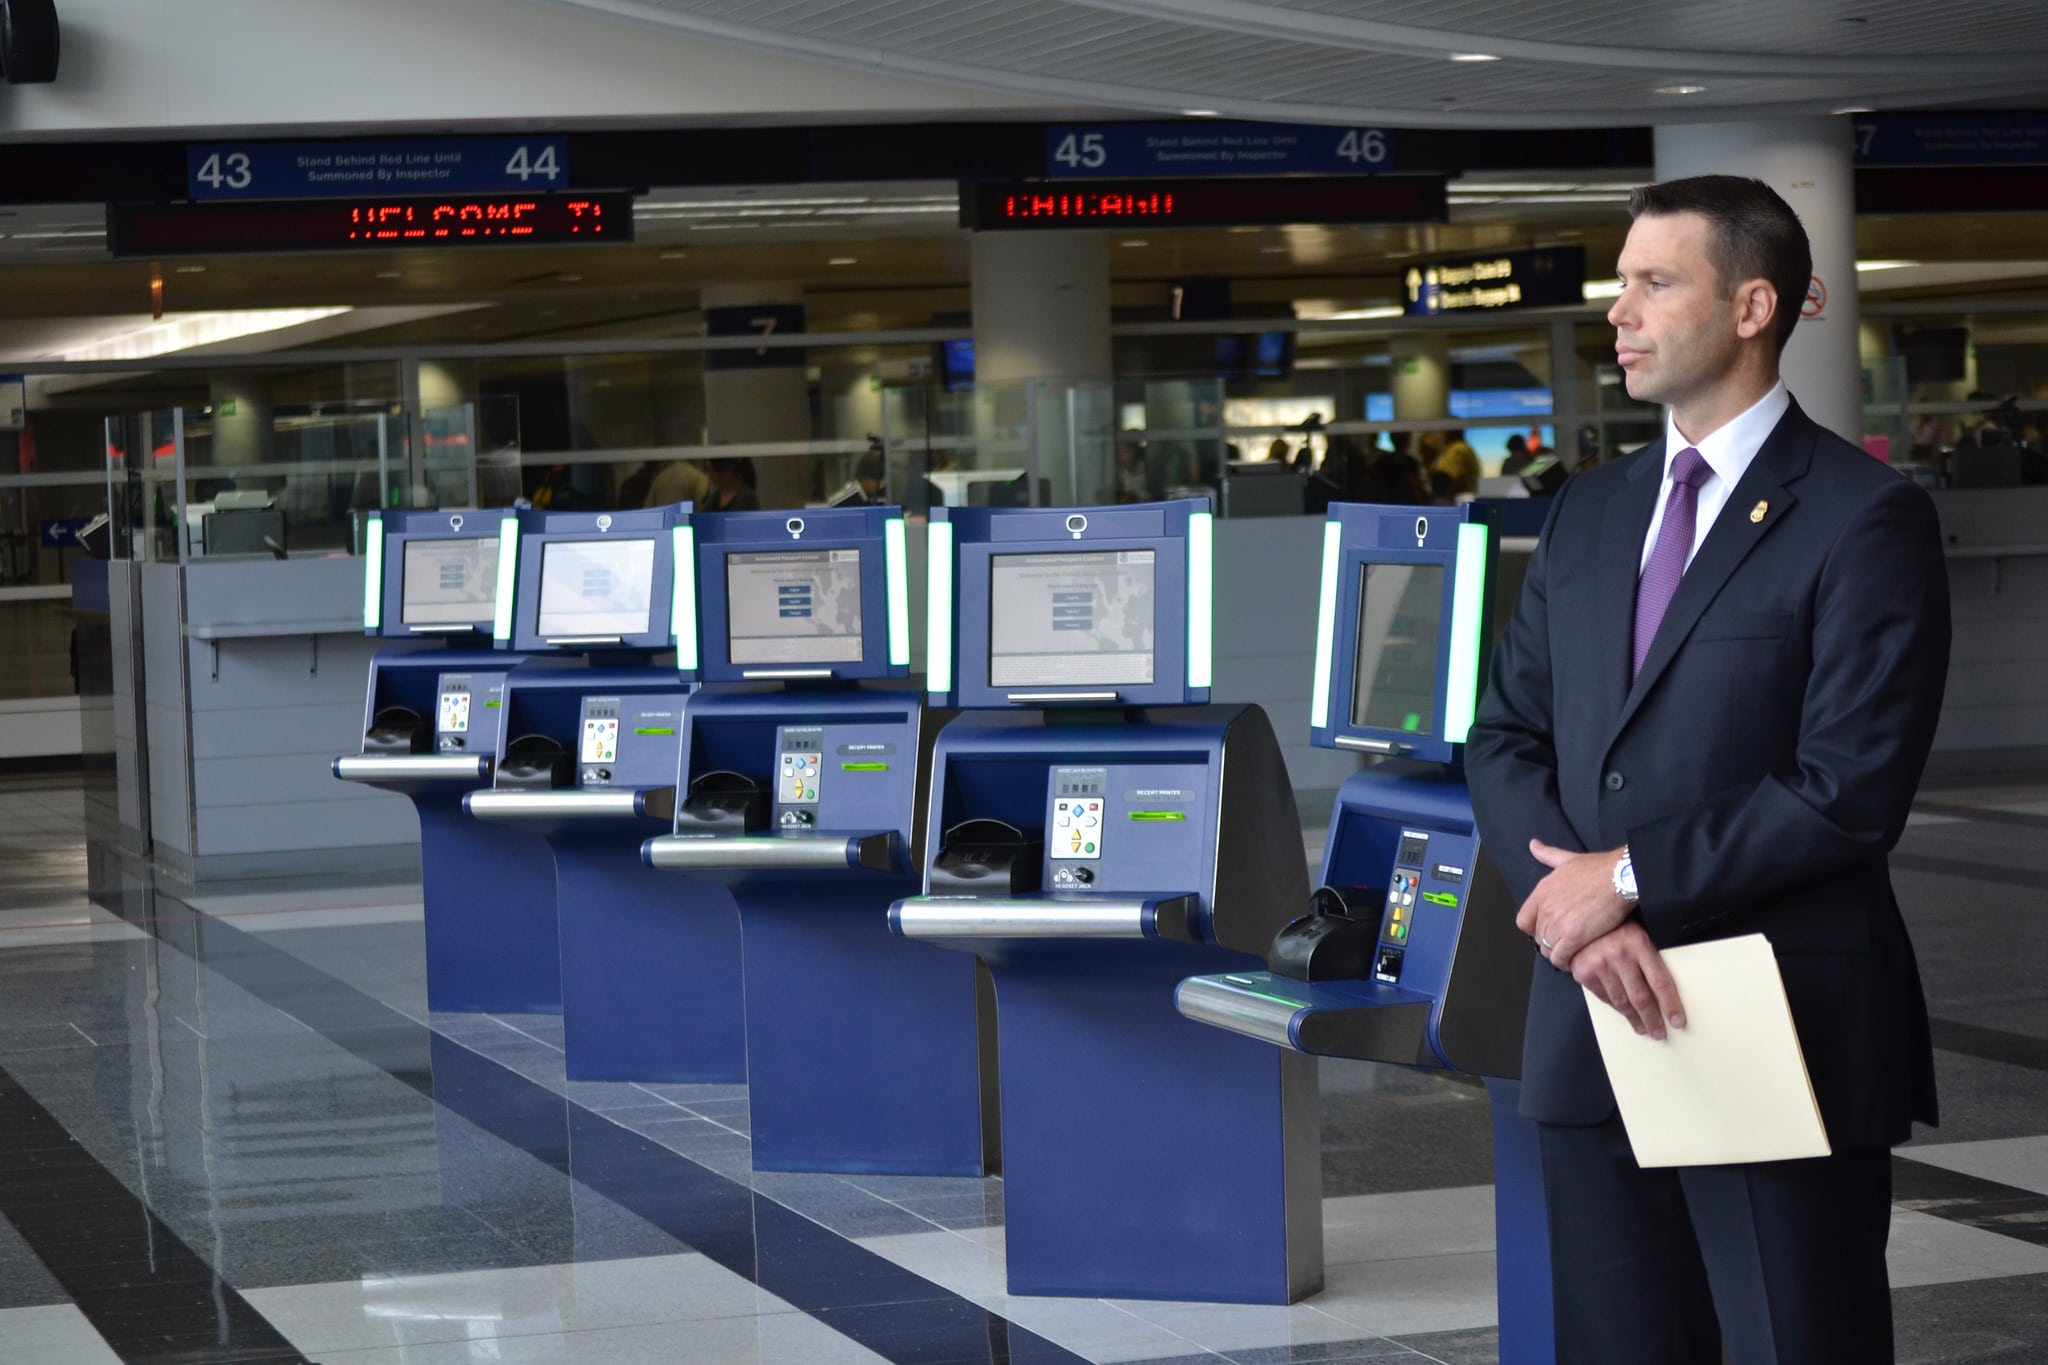 SITA says automated passport control kiosks at Orlando International Airport have cut wait times at customs, but other data suggests otherwise. Pictured are automated passport control kiosks at Chicago O'Hare Airport in 2013.